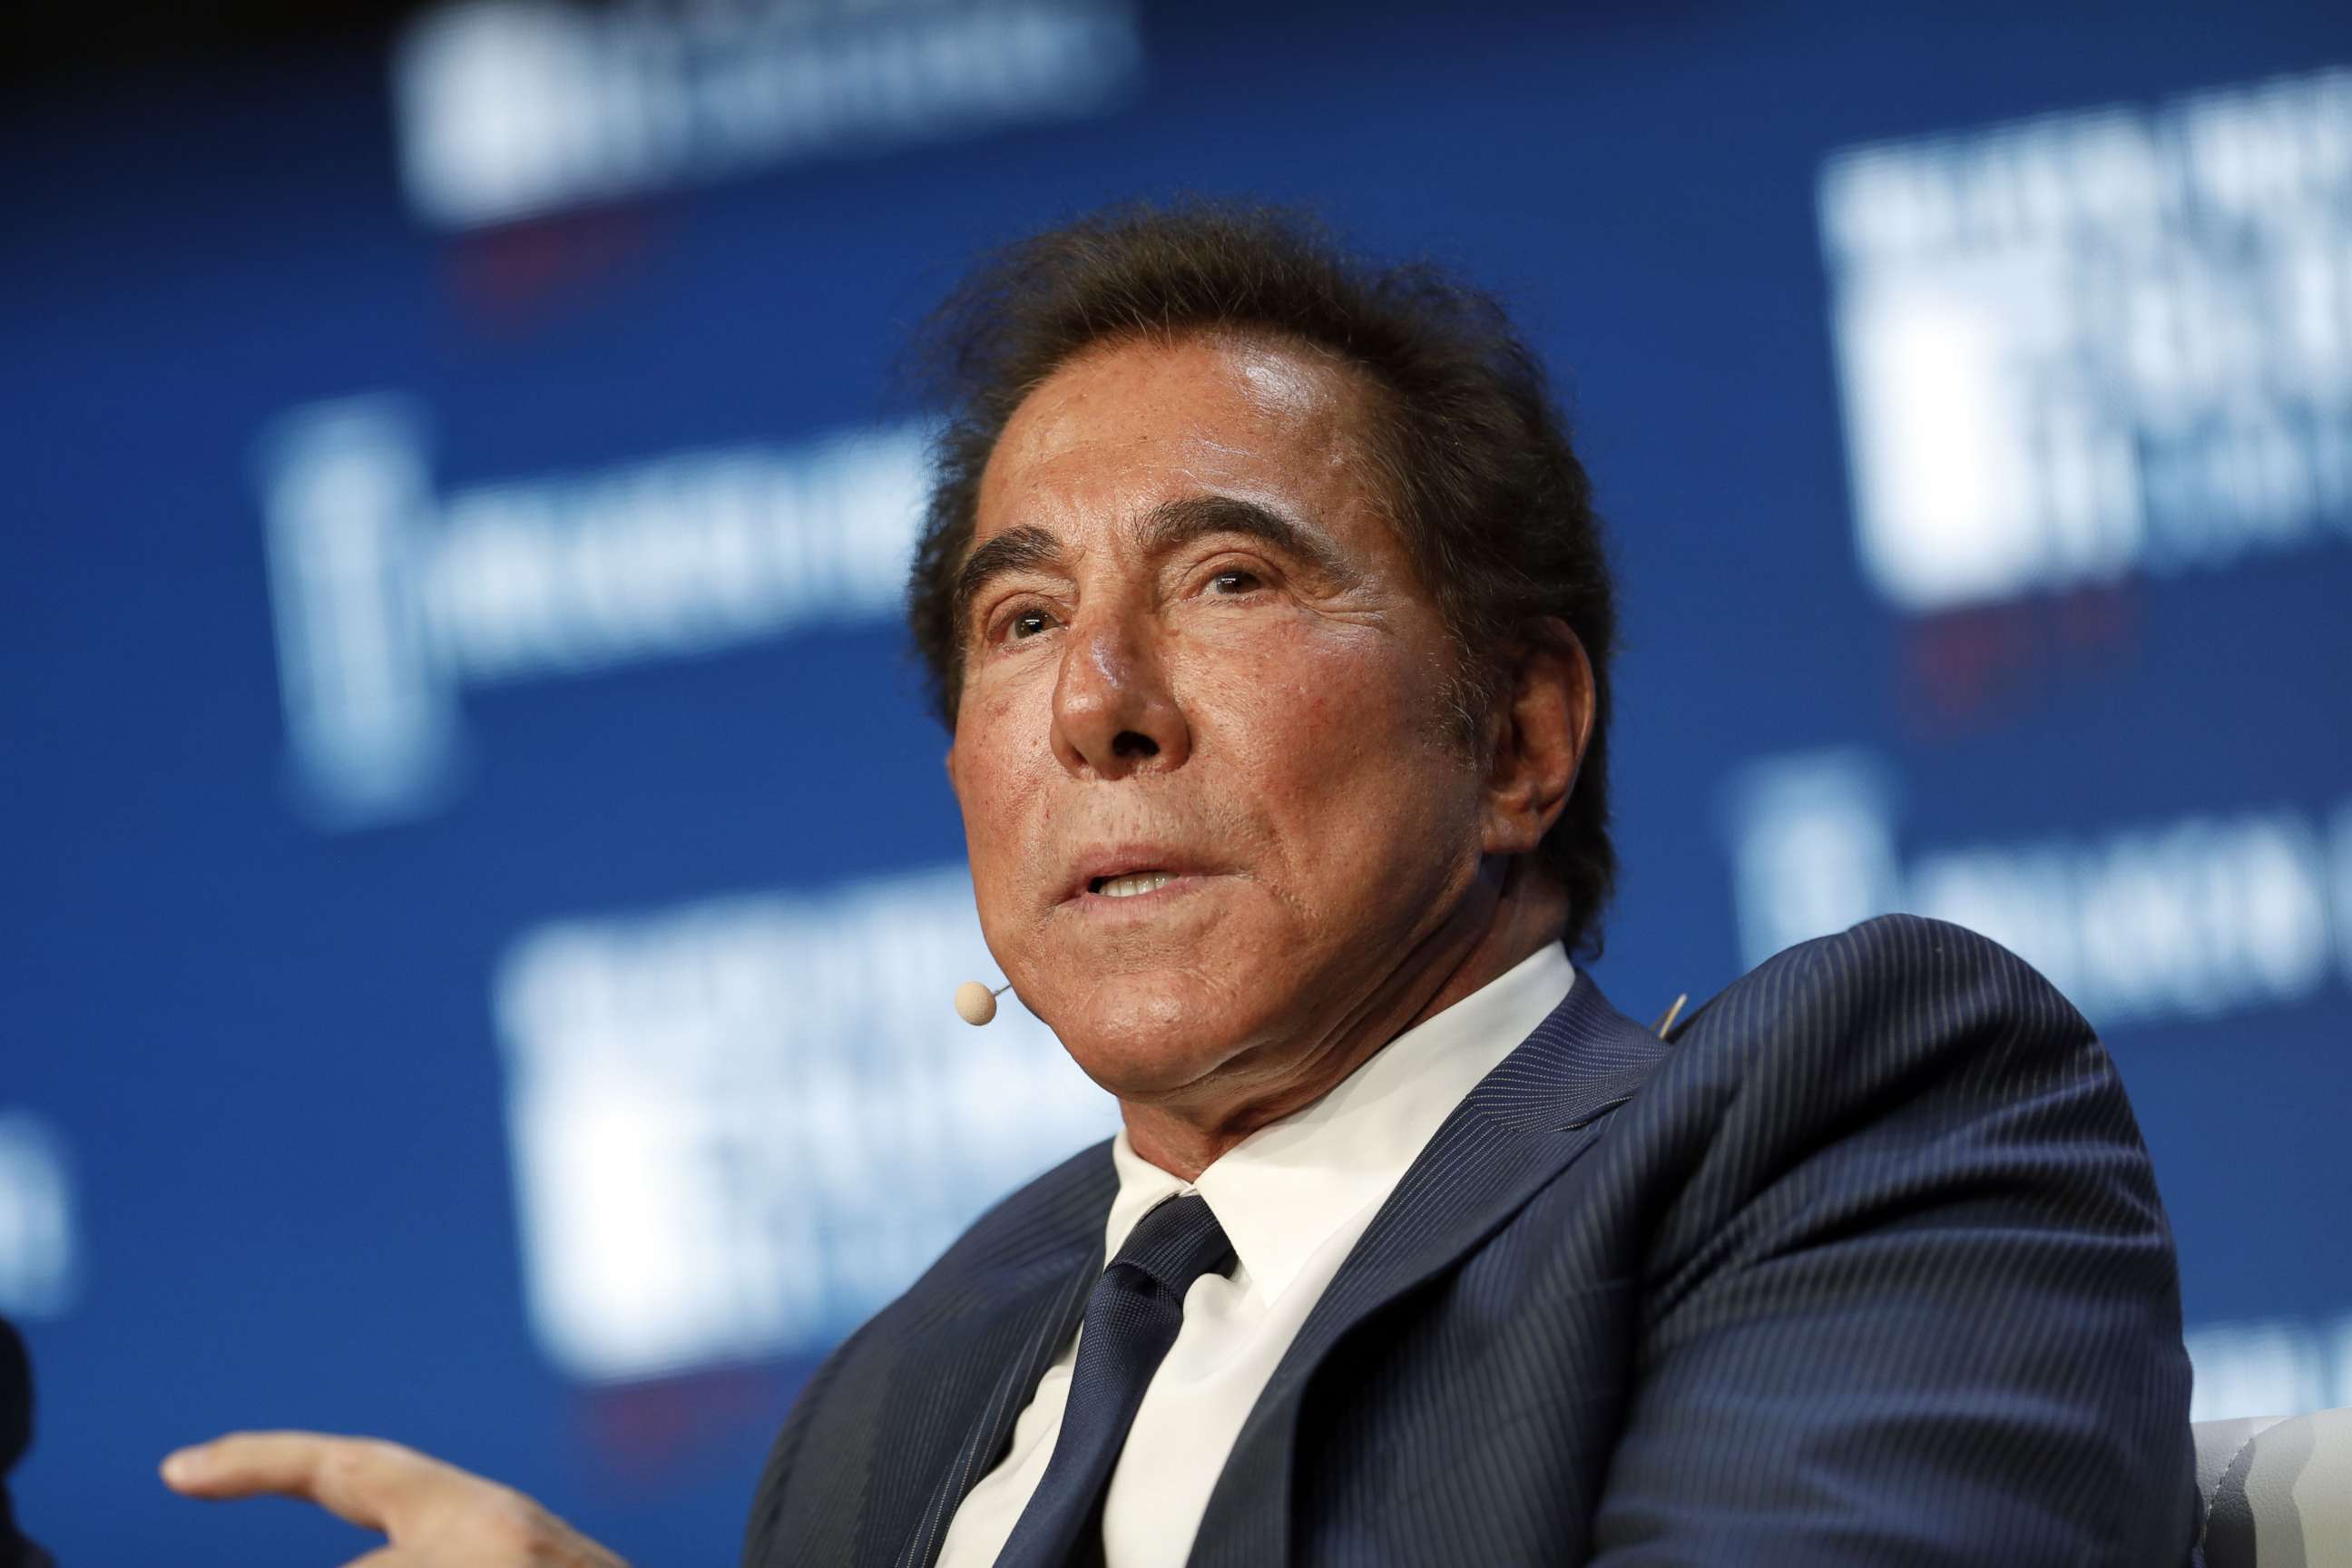 PHOTO: Billionaire Steve Wynn speaks during the Milken Institute Global Conference in Beverly Hills, Calif., May 3, 2017.